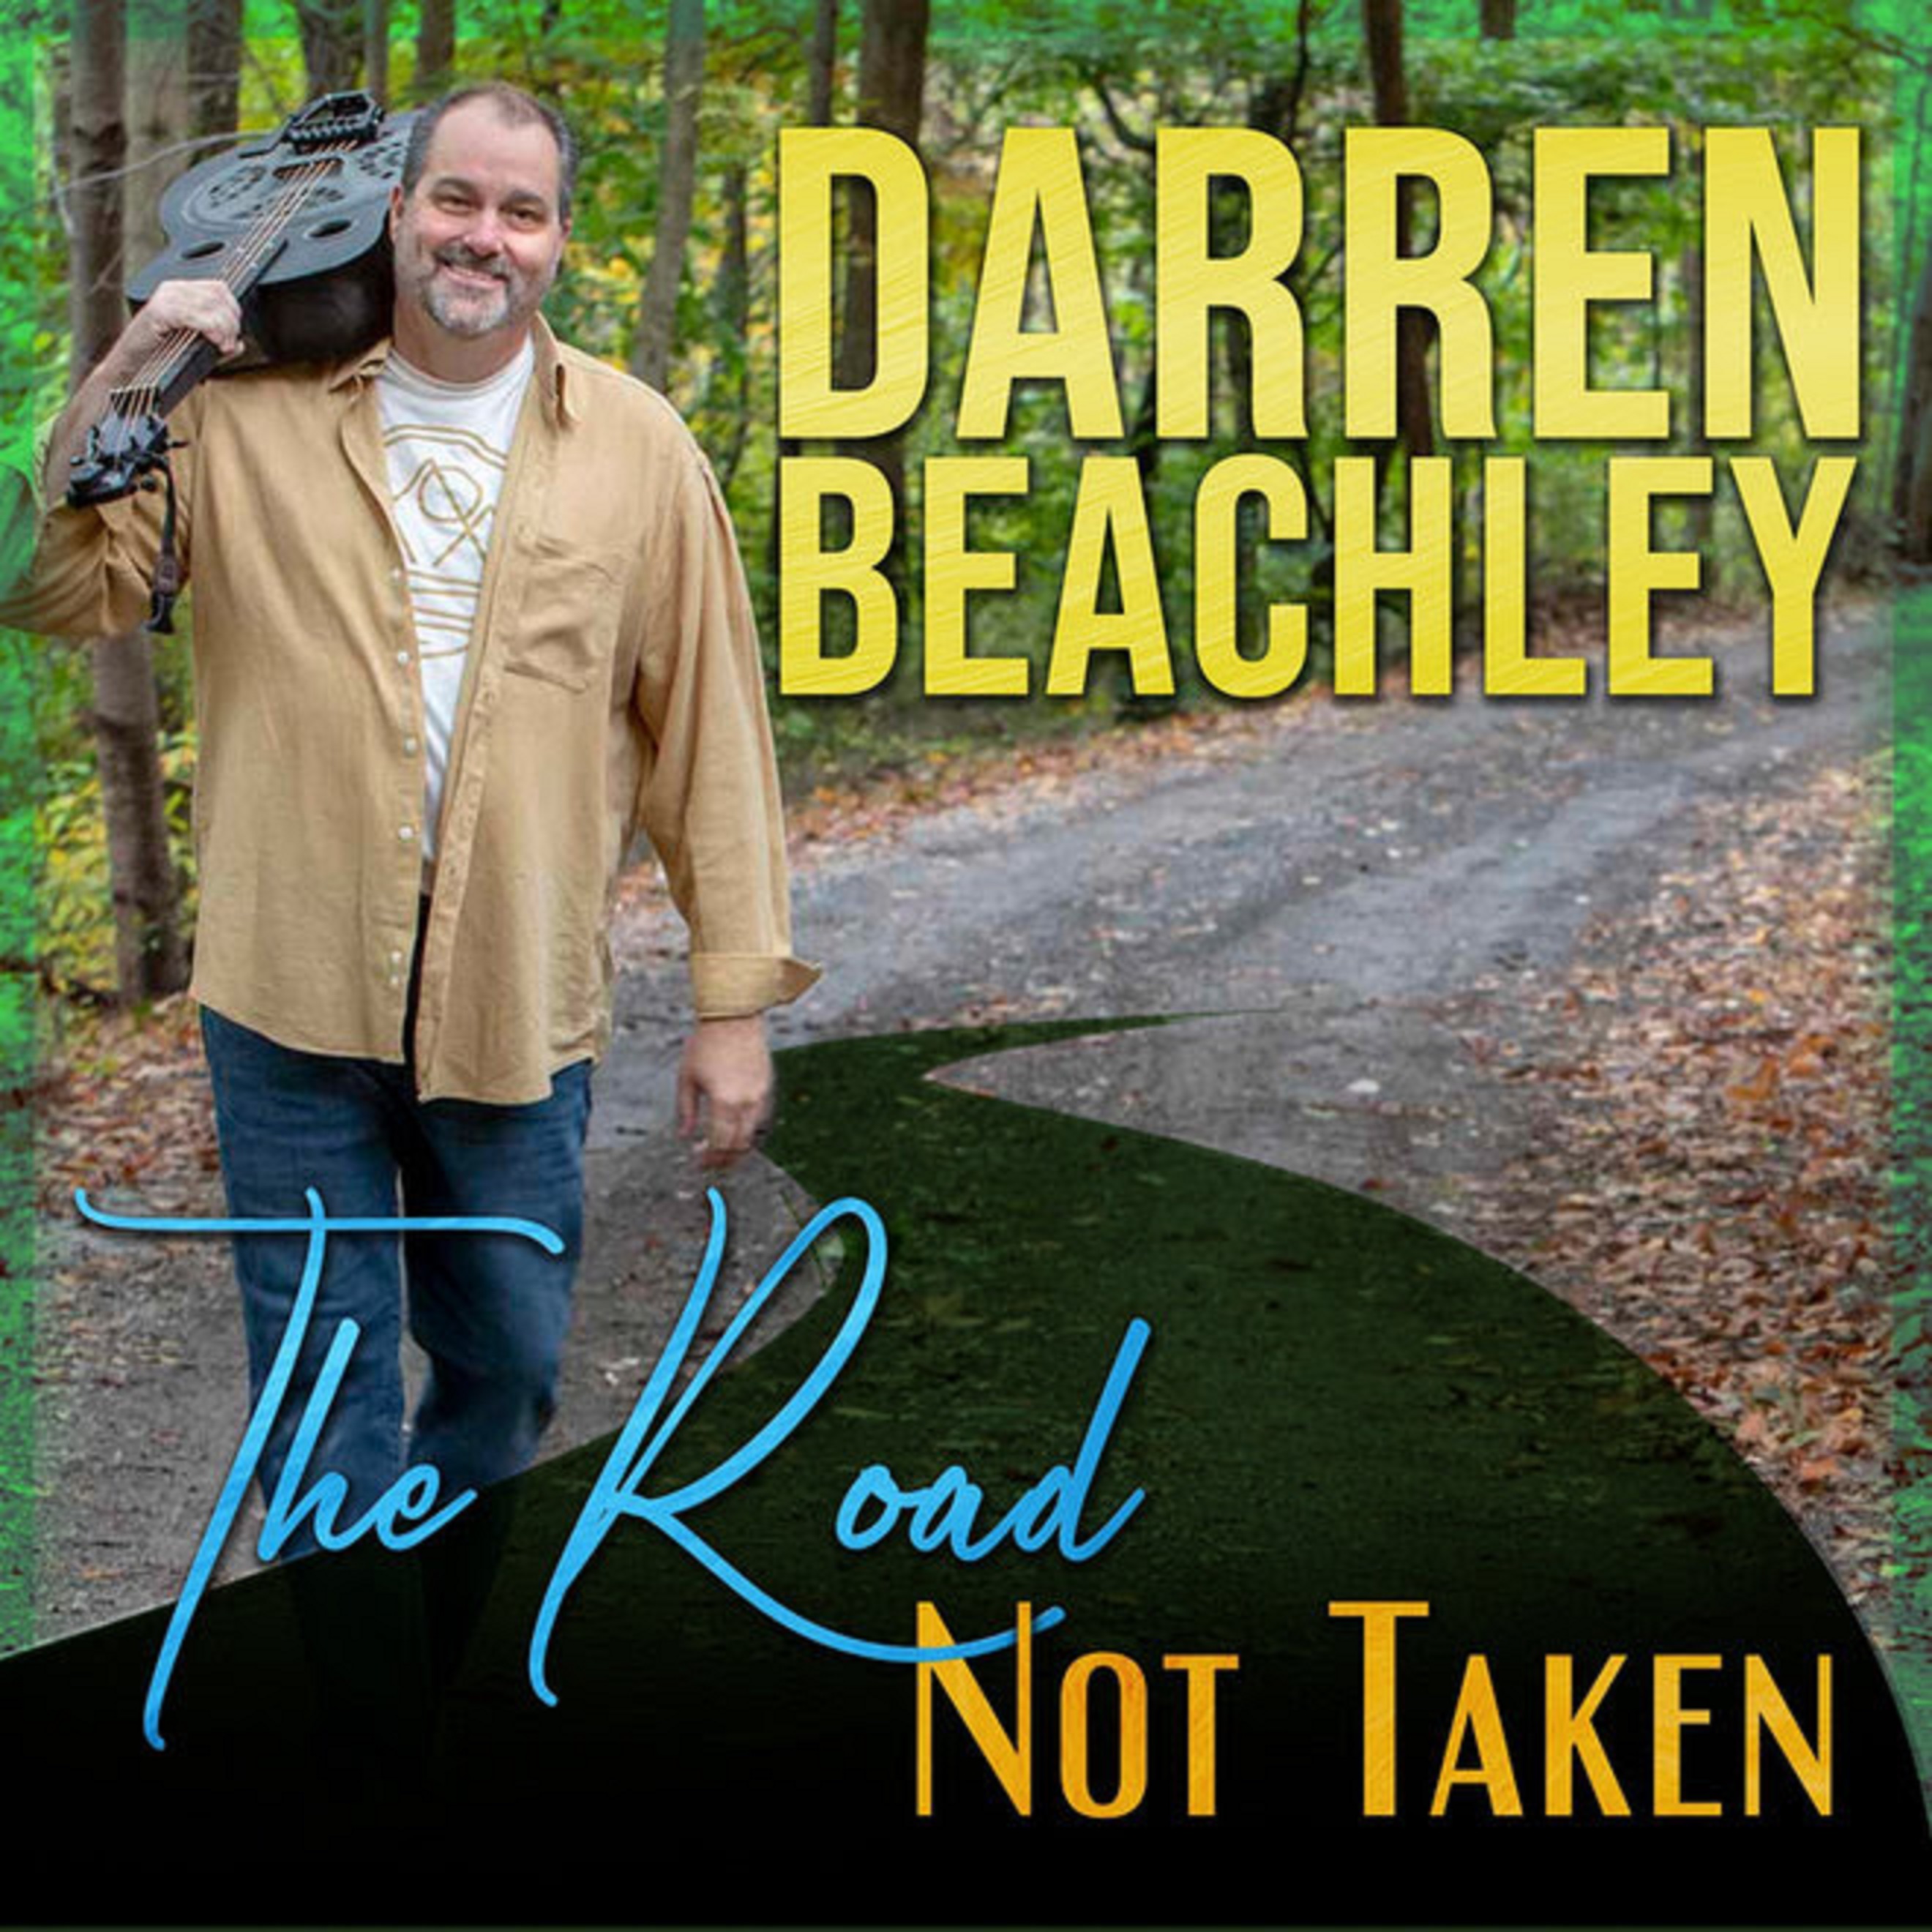 With New Album, Darren Beachley Forges New Musical Paths